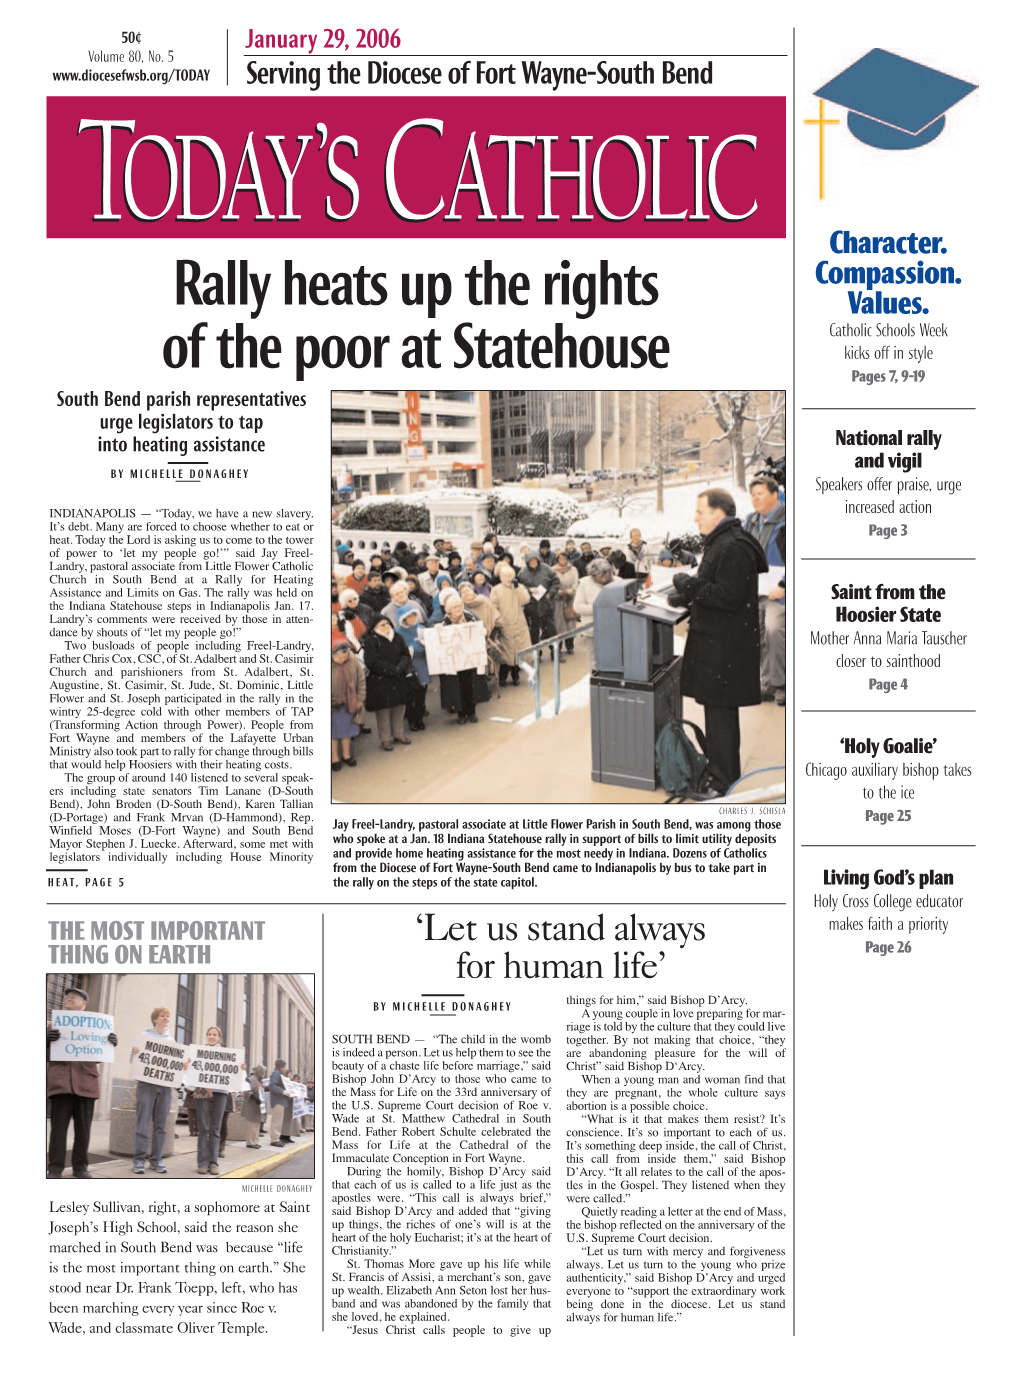 Rally Heats up the Rights of the Poor at Statehouse